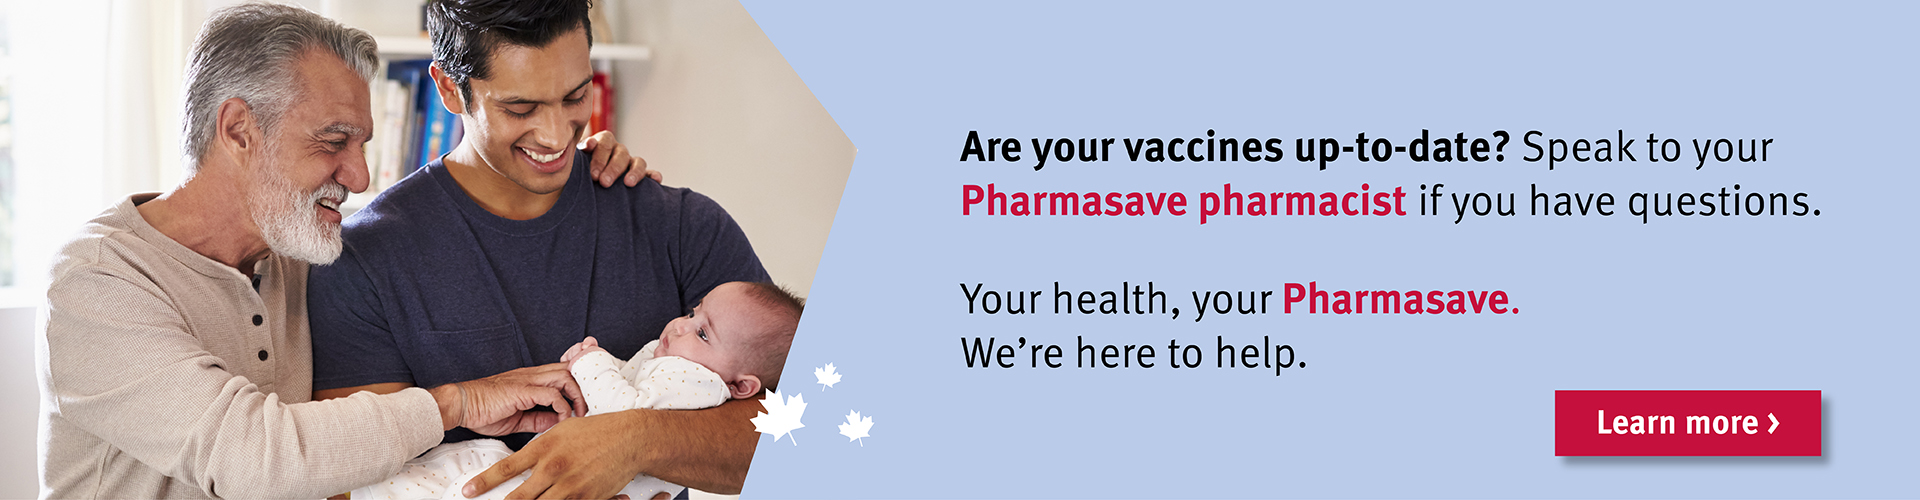 Are your vaccines up-to-date? Speak with your Pharmasave pharmacist.